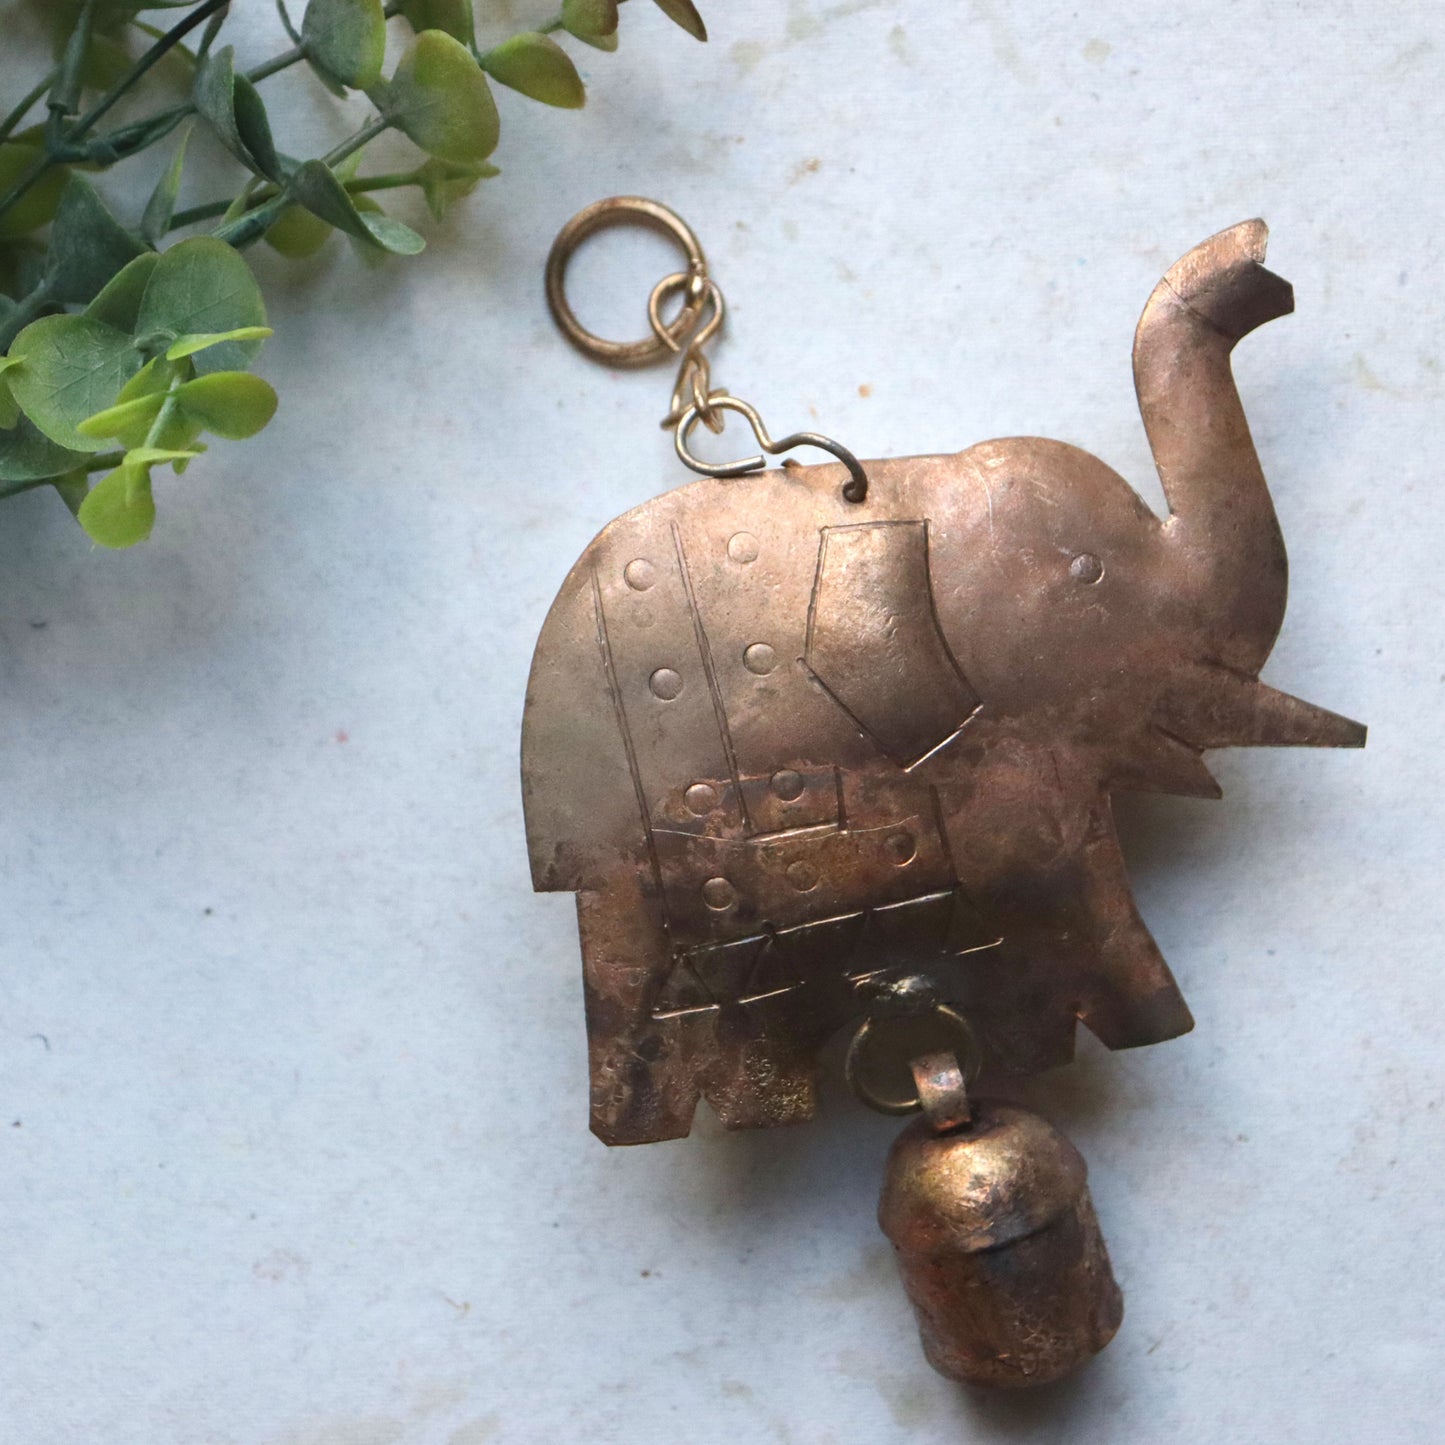 Elephant Decorative Chime with Bell - Rustic, Ethical, Hand-tuned, Recycled Metal - Aksa Home Decor 